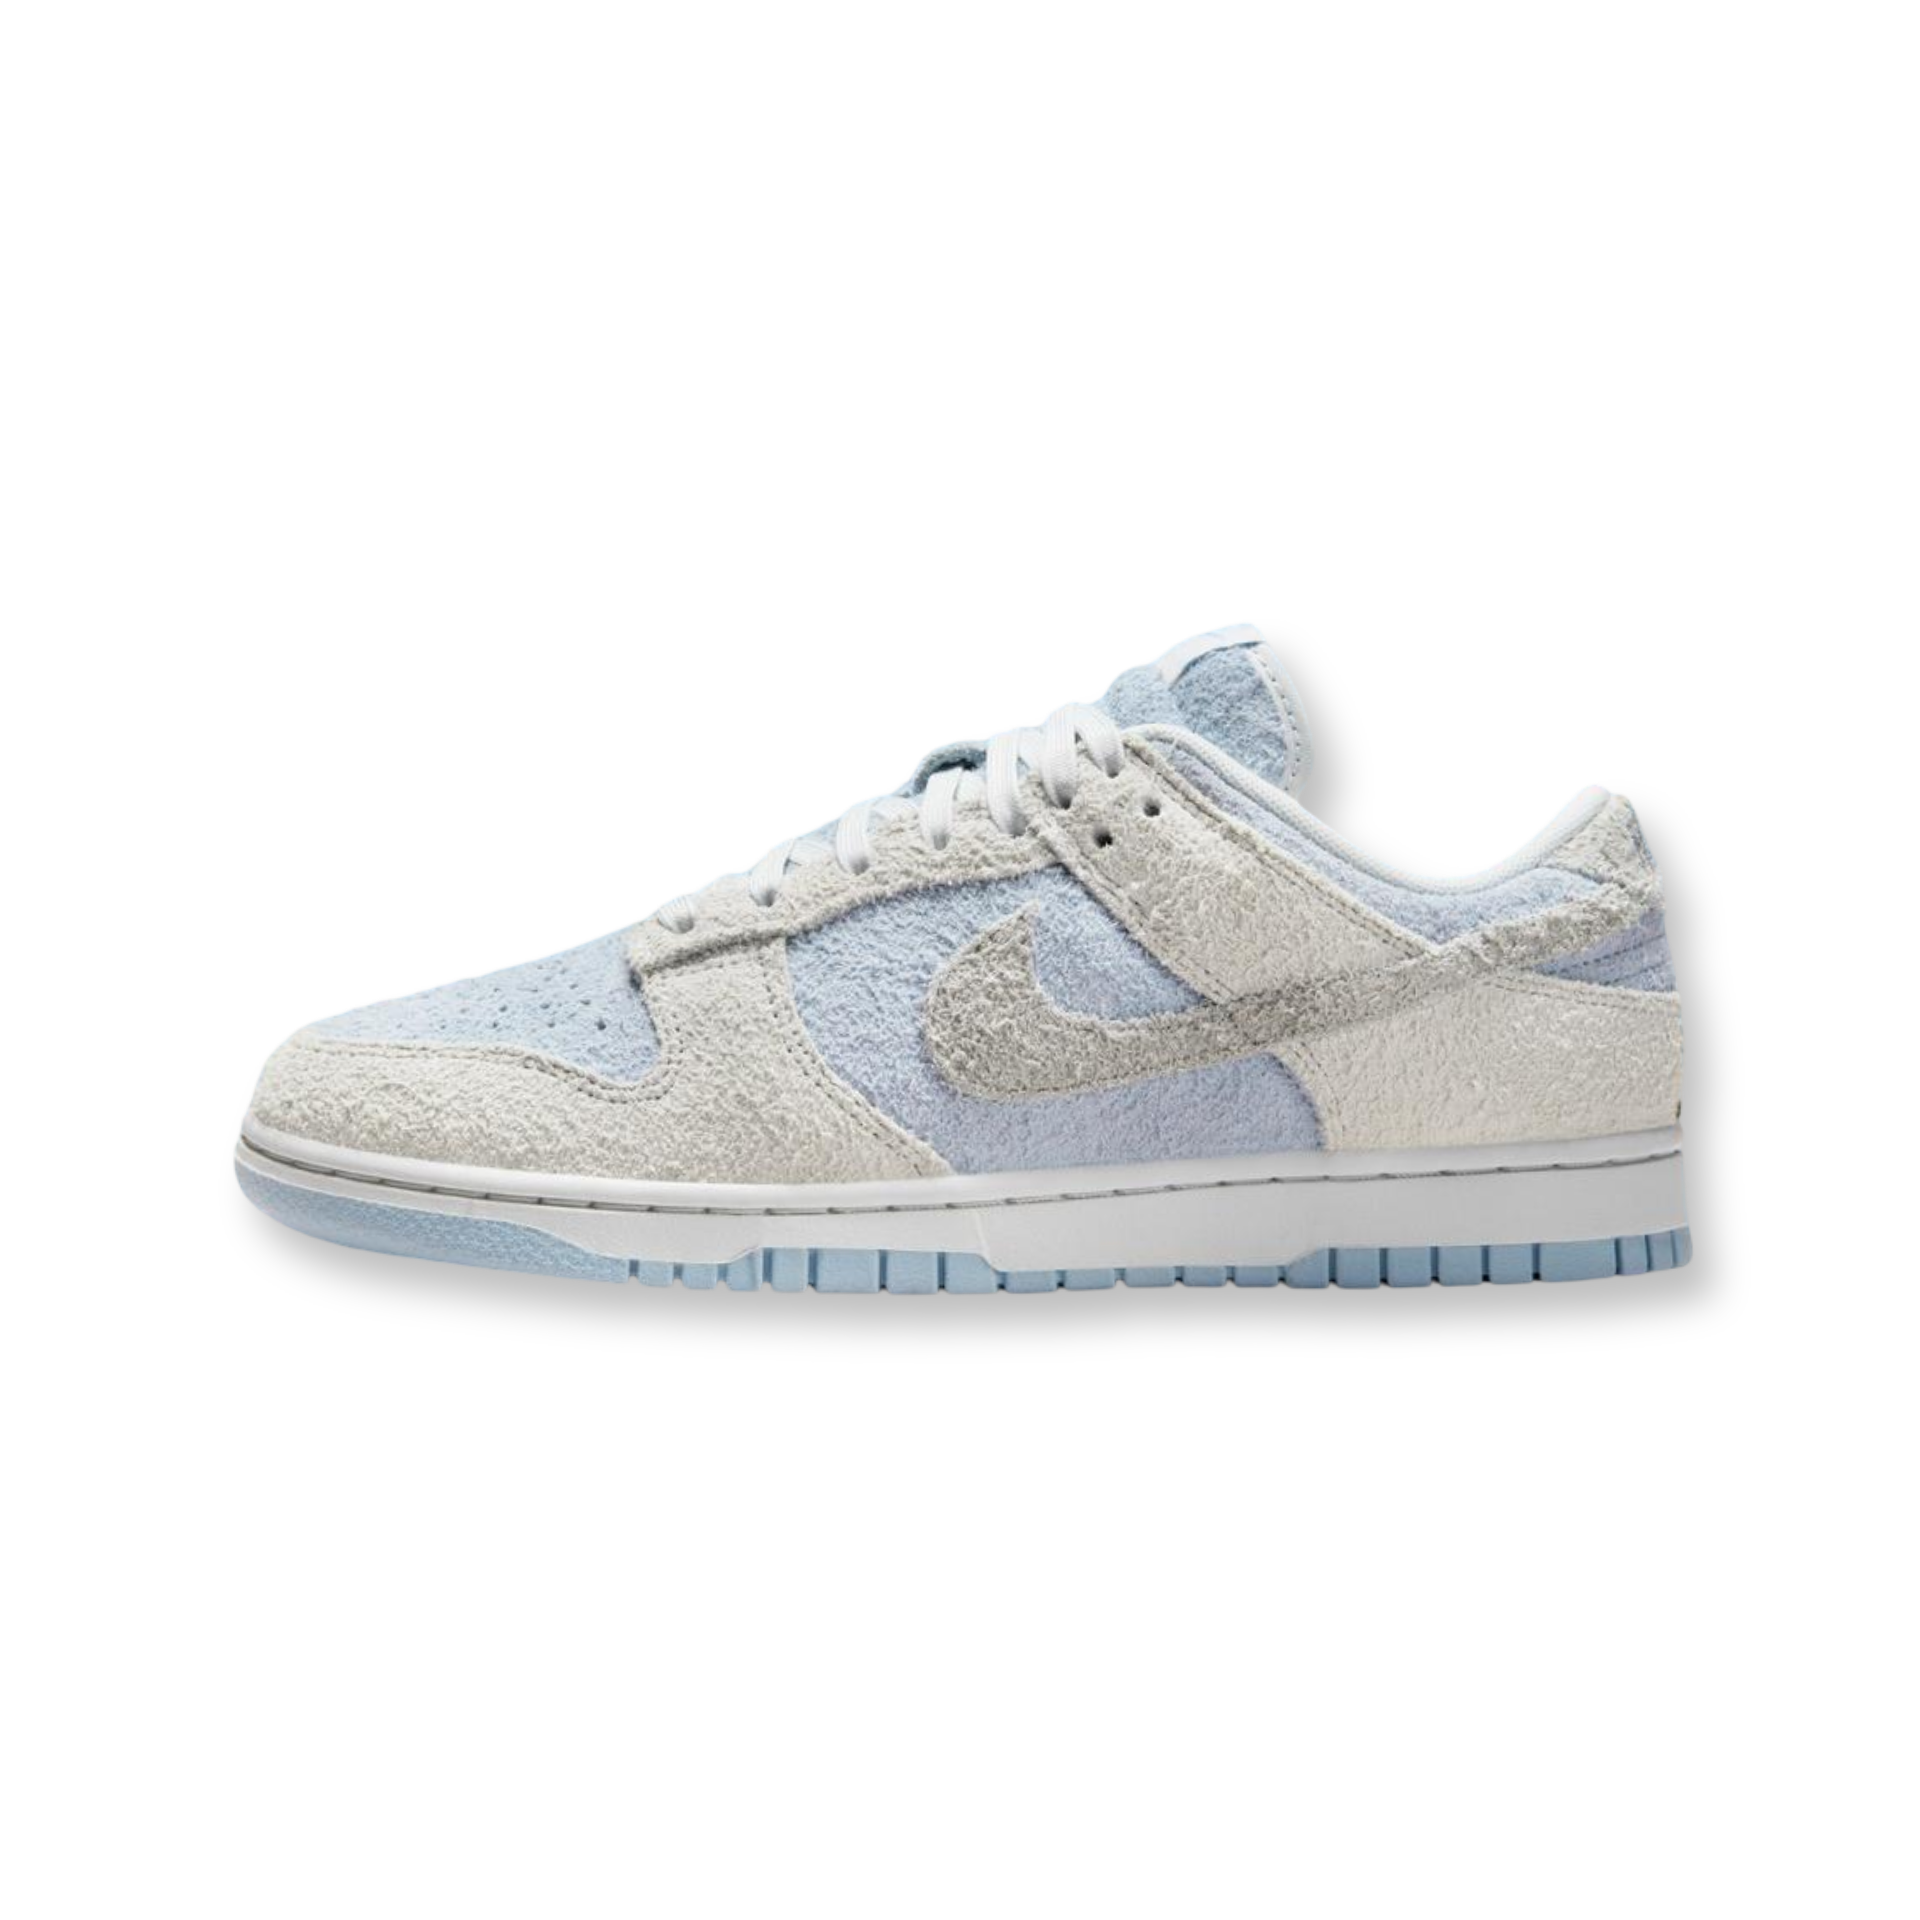 Nike dunk low Light Armoury Blue and Photon Dust